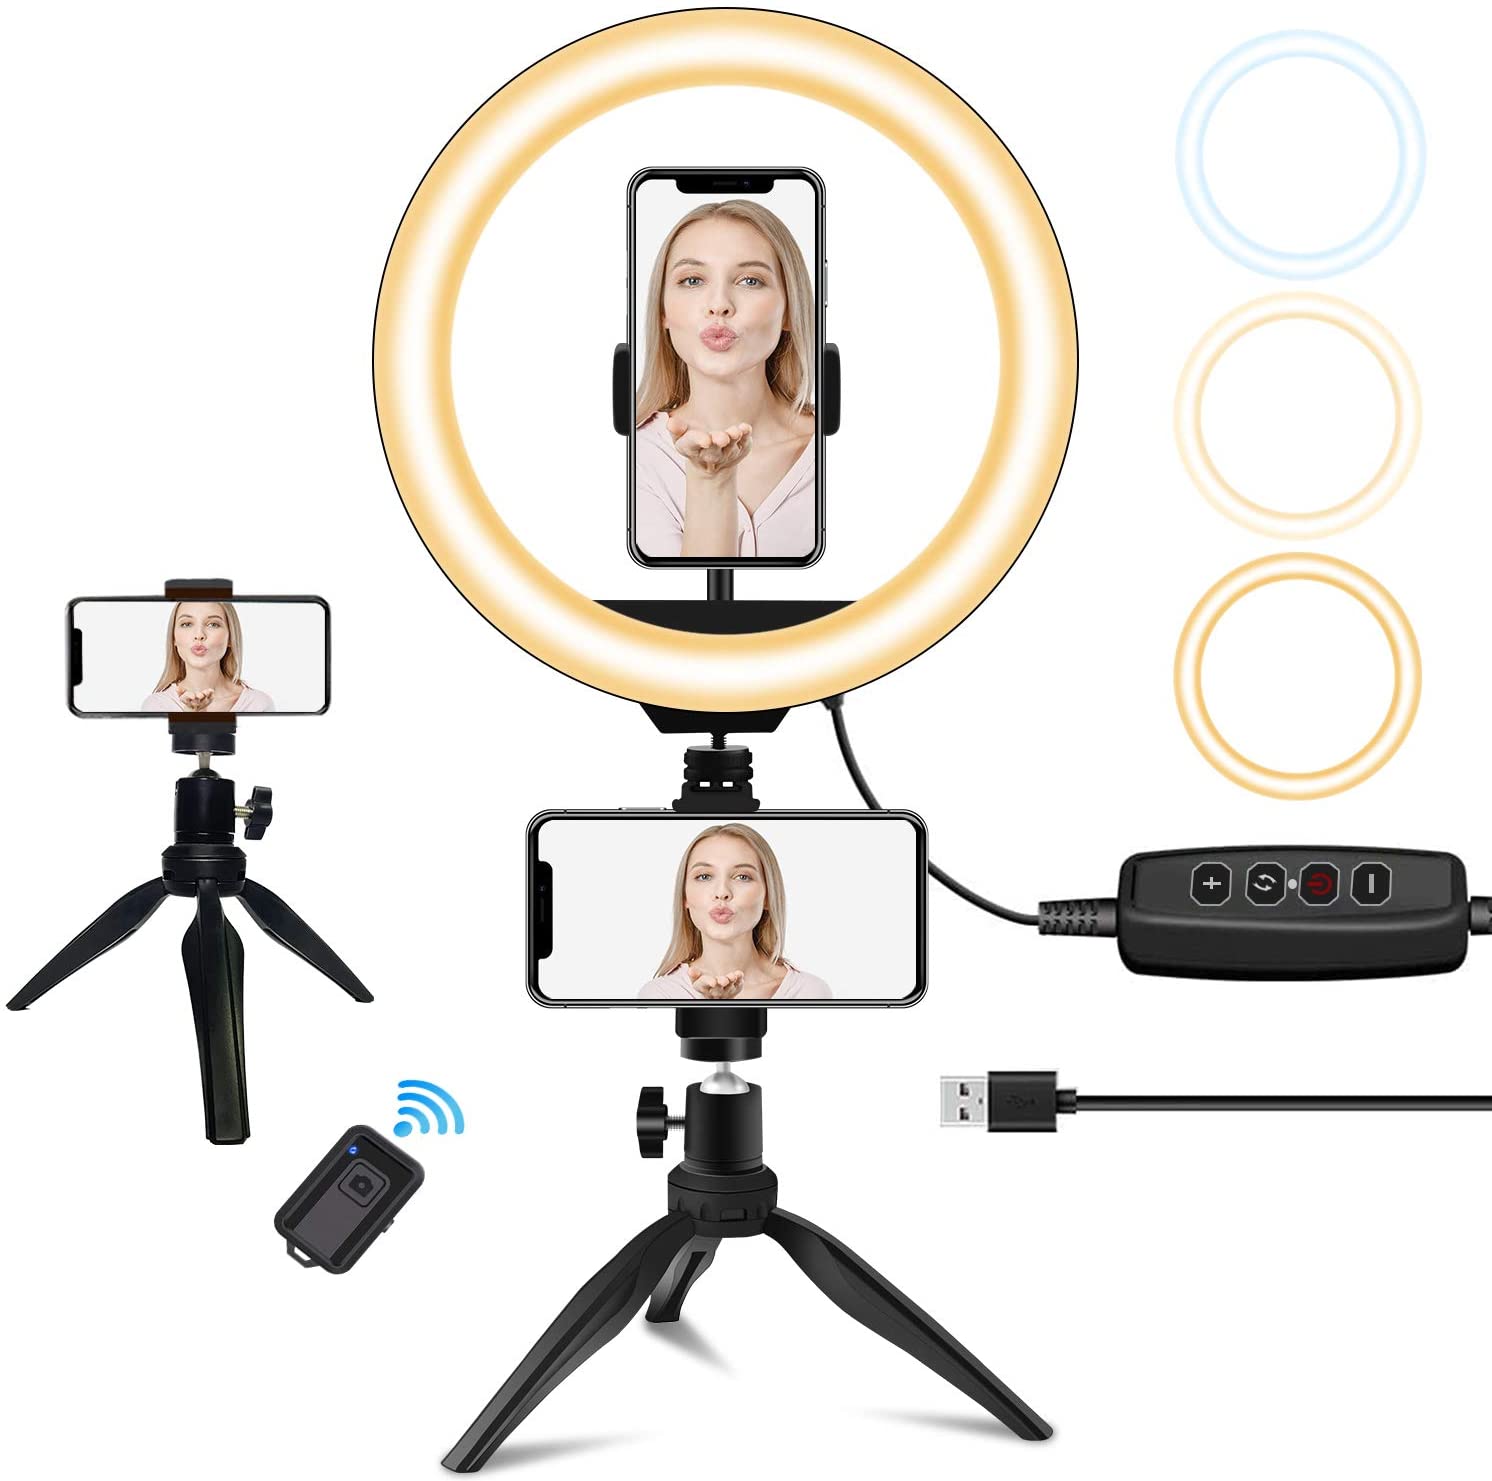 Sumcoo Desk Selfie Ring Light for iPhone